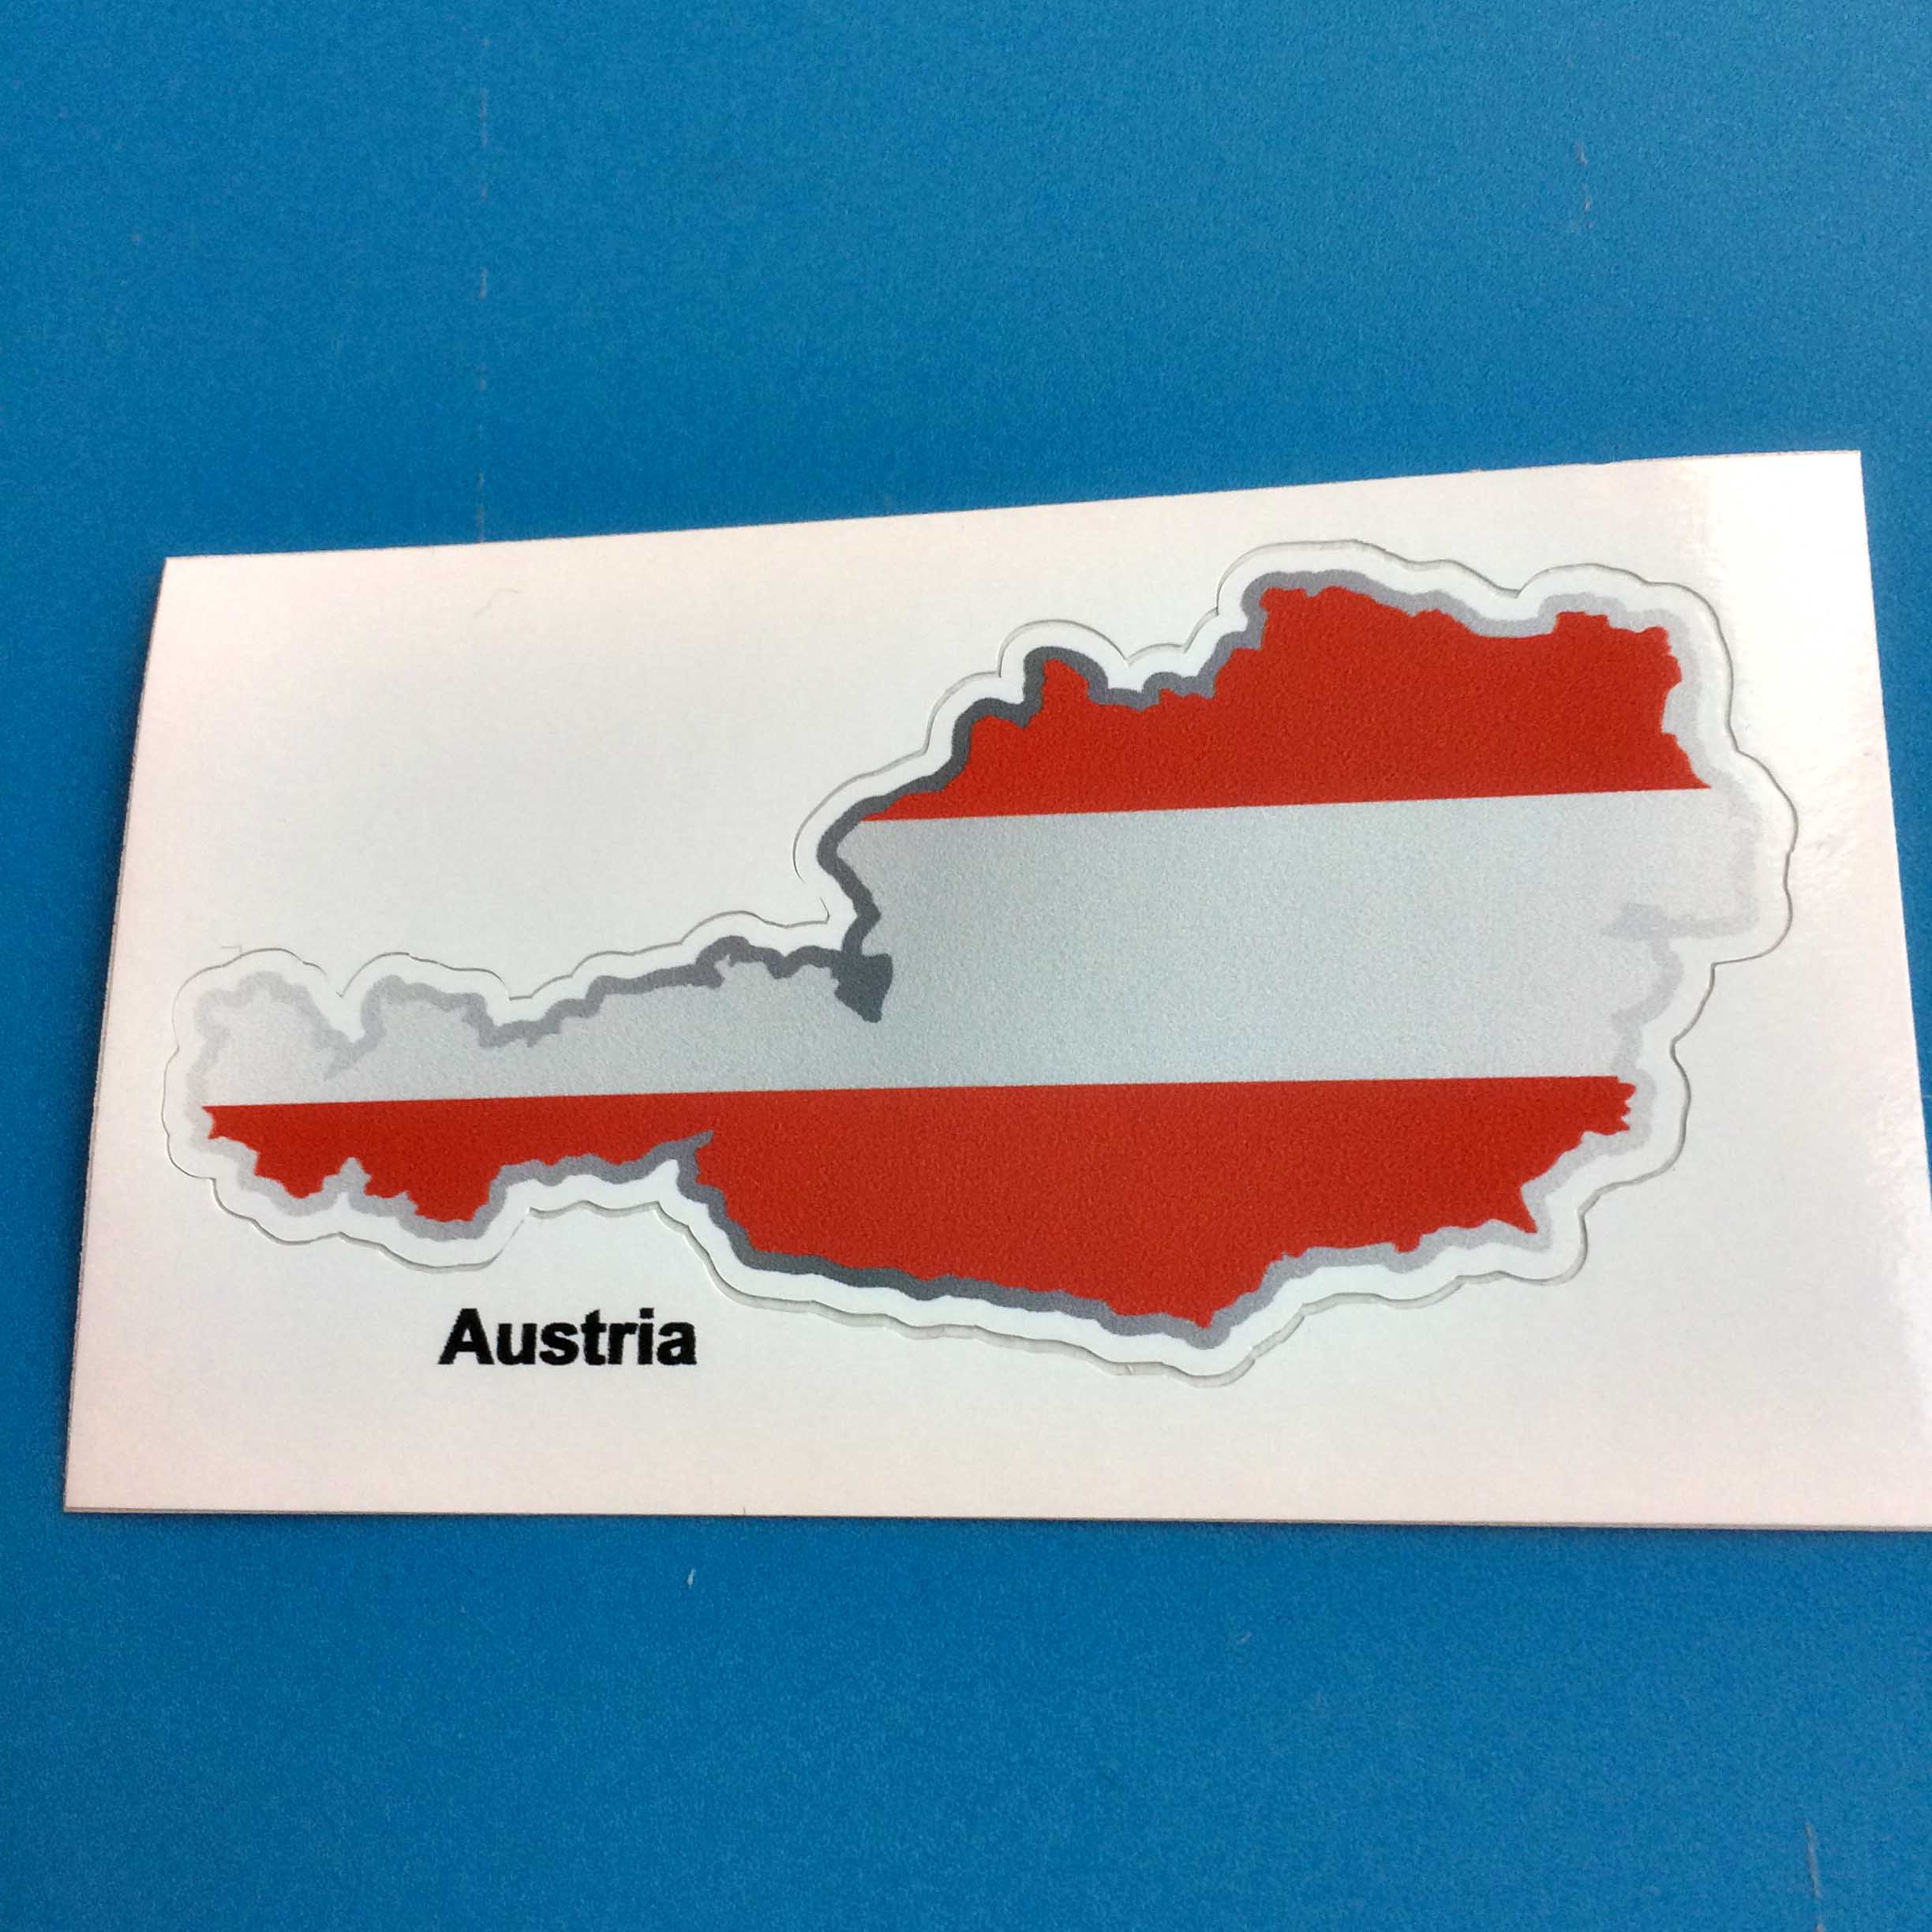 AUSTRIA FLAG AND MAP STICKER. Red and white Austria flag and map.